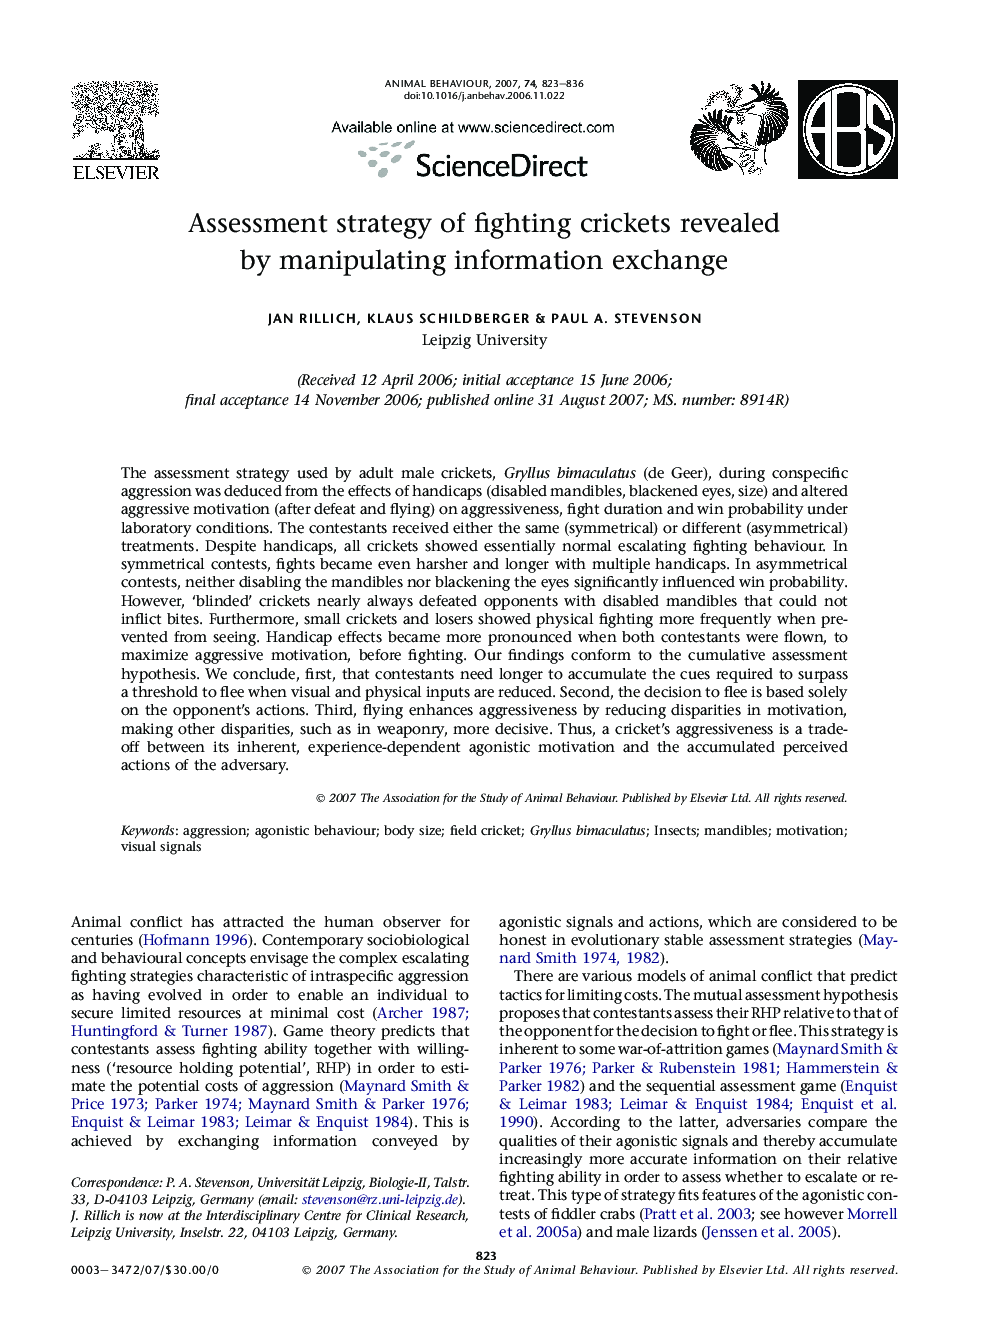 Assessment strategy of fighting crickets revealed by manipulating information exchange